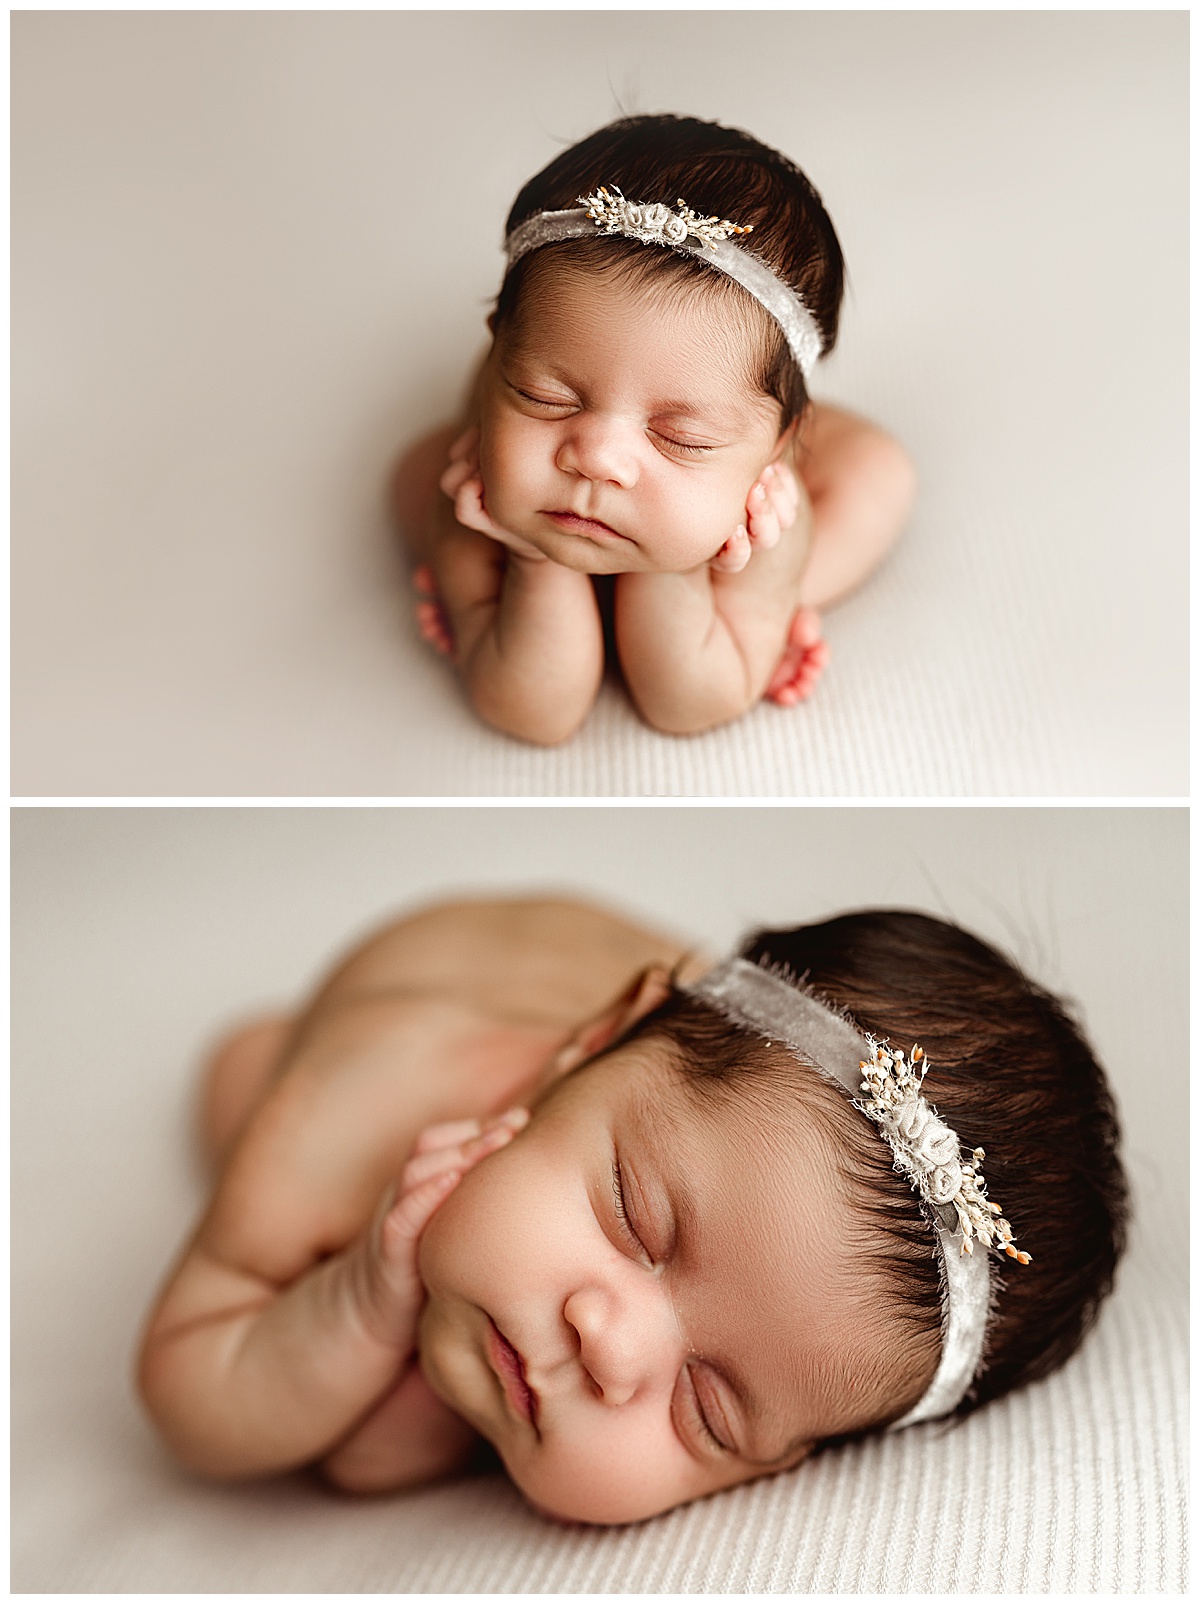 Newborn baby laying on hands for Norma Fayak Photography